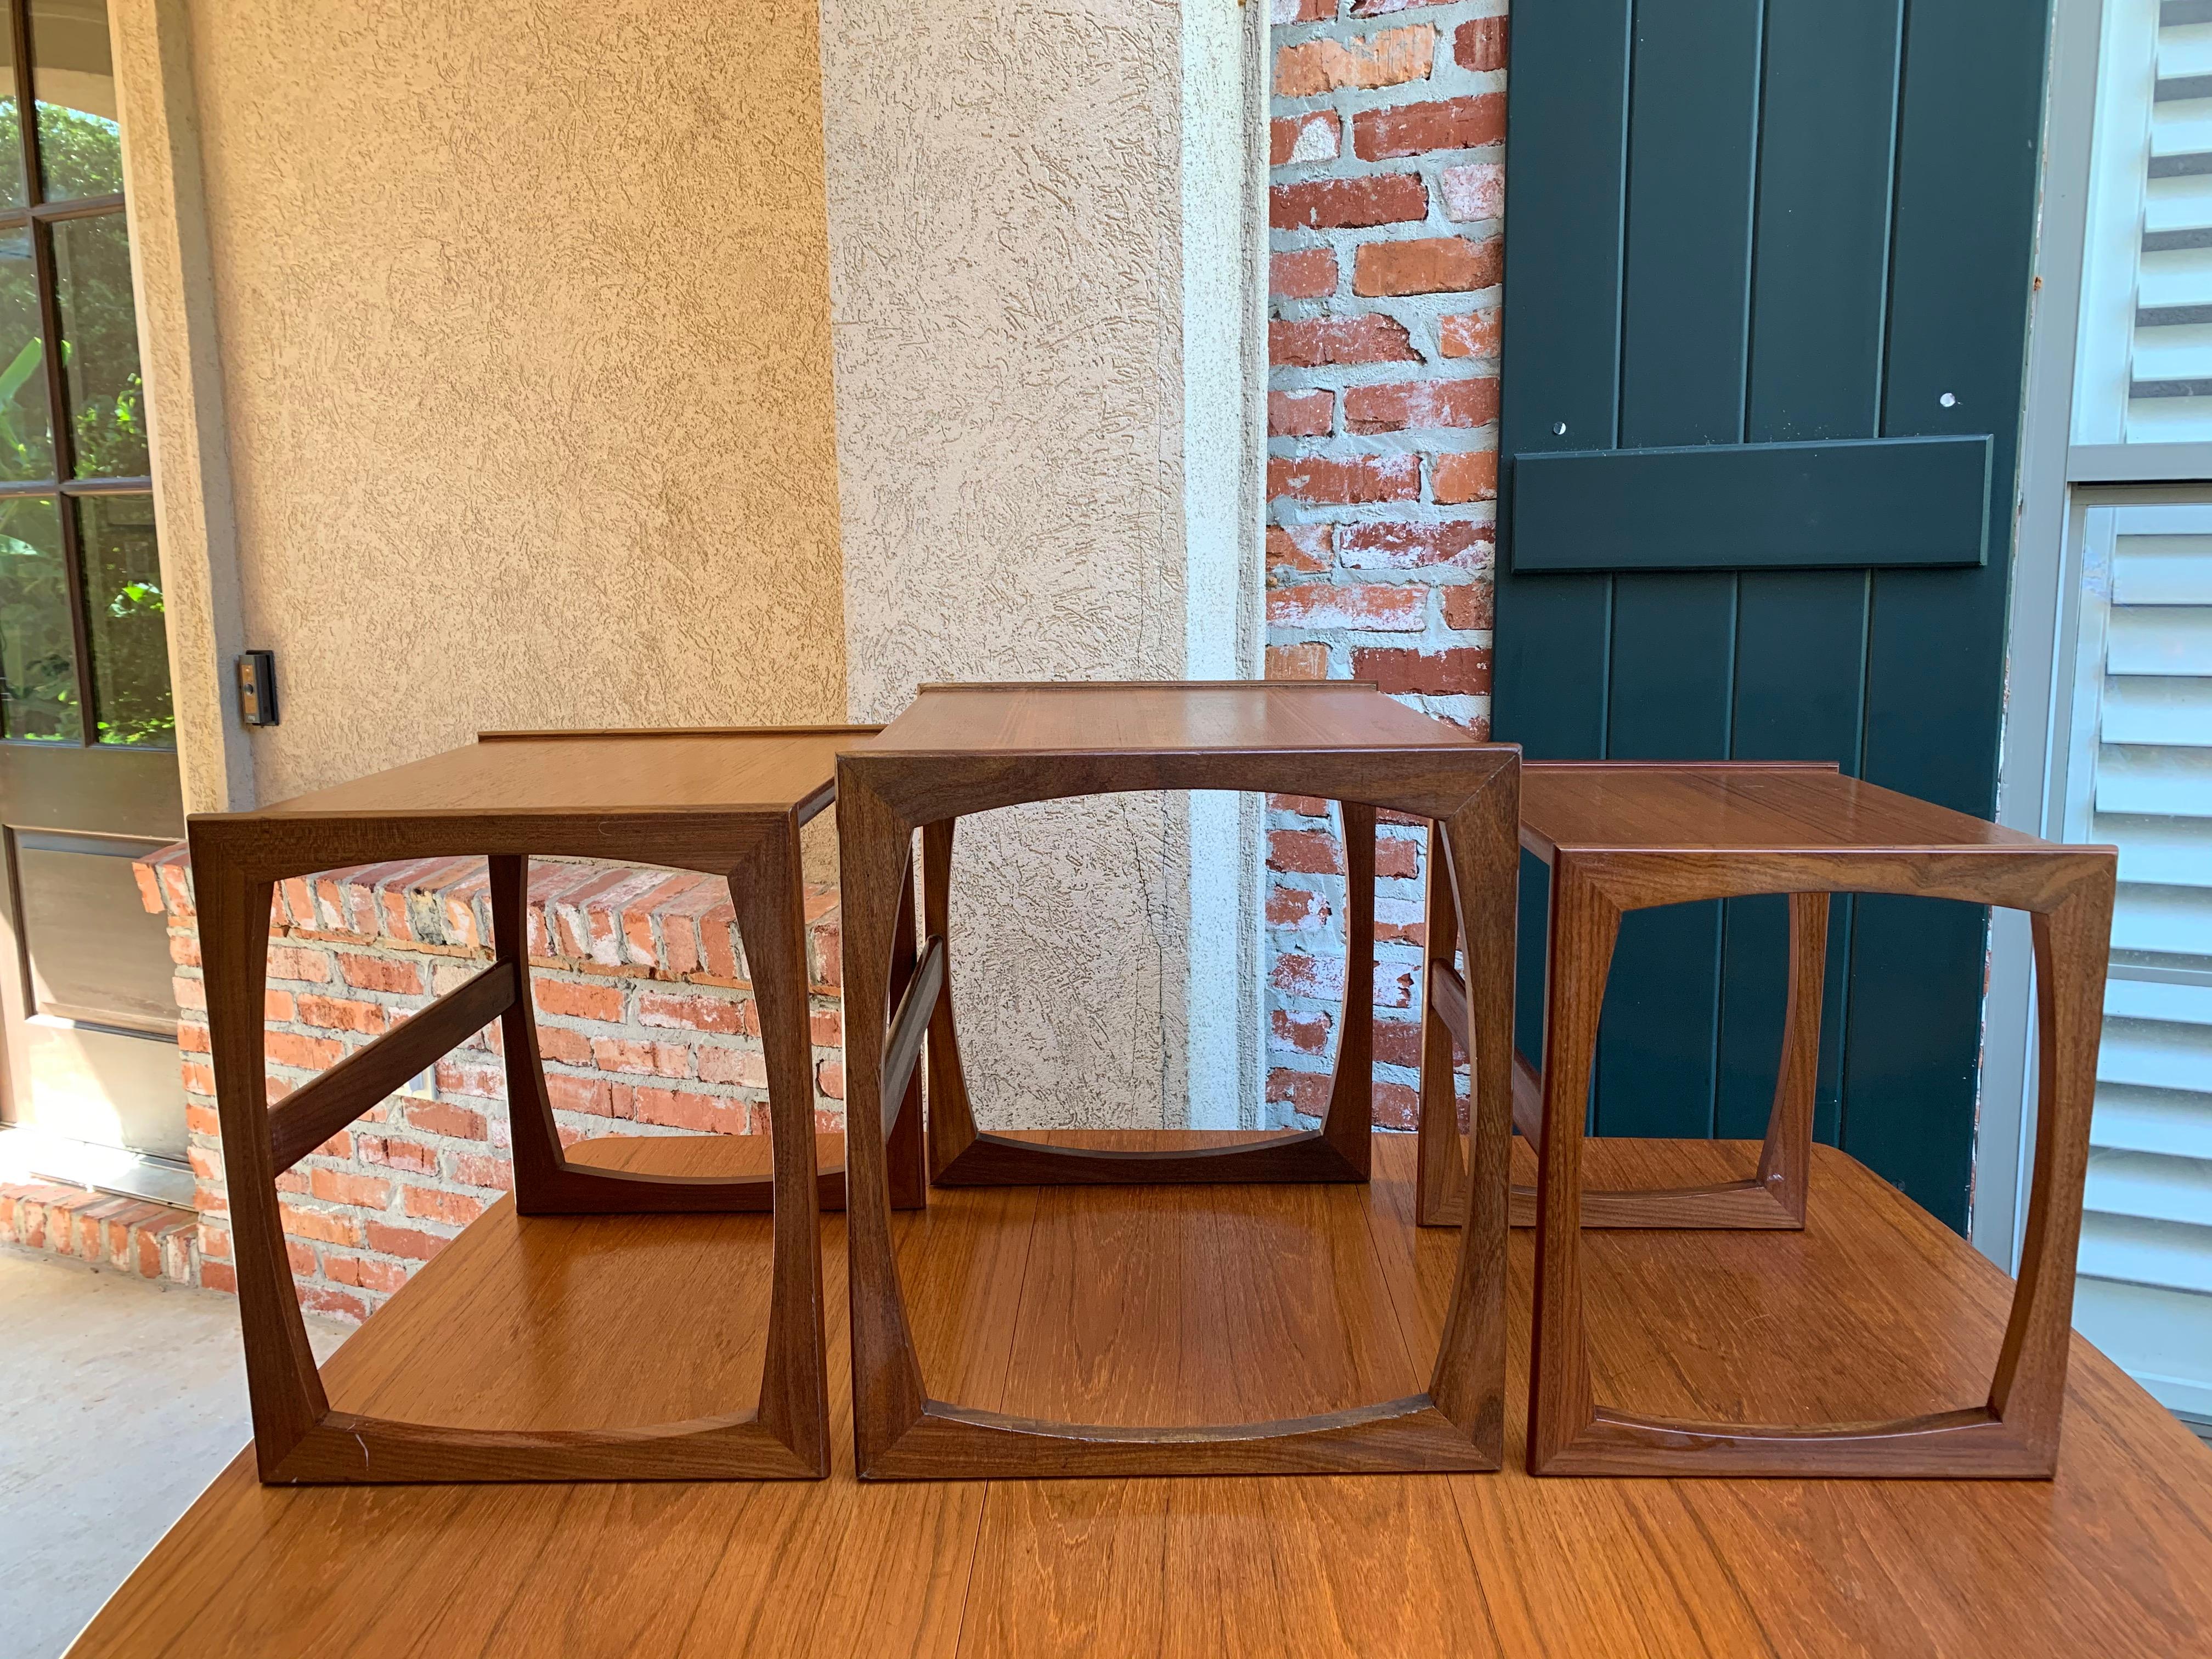 Direct from England, a lovely set of 3 nesting tables~
~Mid-Century Modern styling with gorgeous teak veneer~
~circa 1960~
(Note: We recently purchased several of these Mid-Century Modern nesting tables and dining tables as well as some